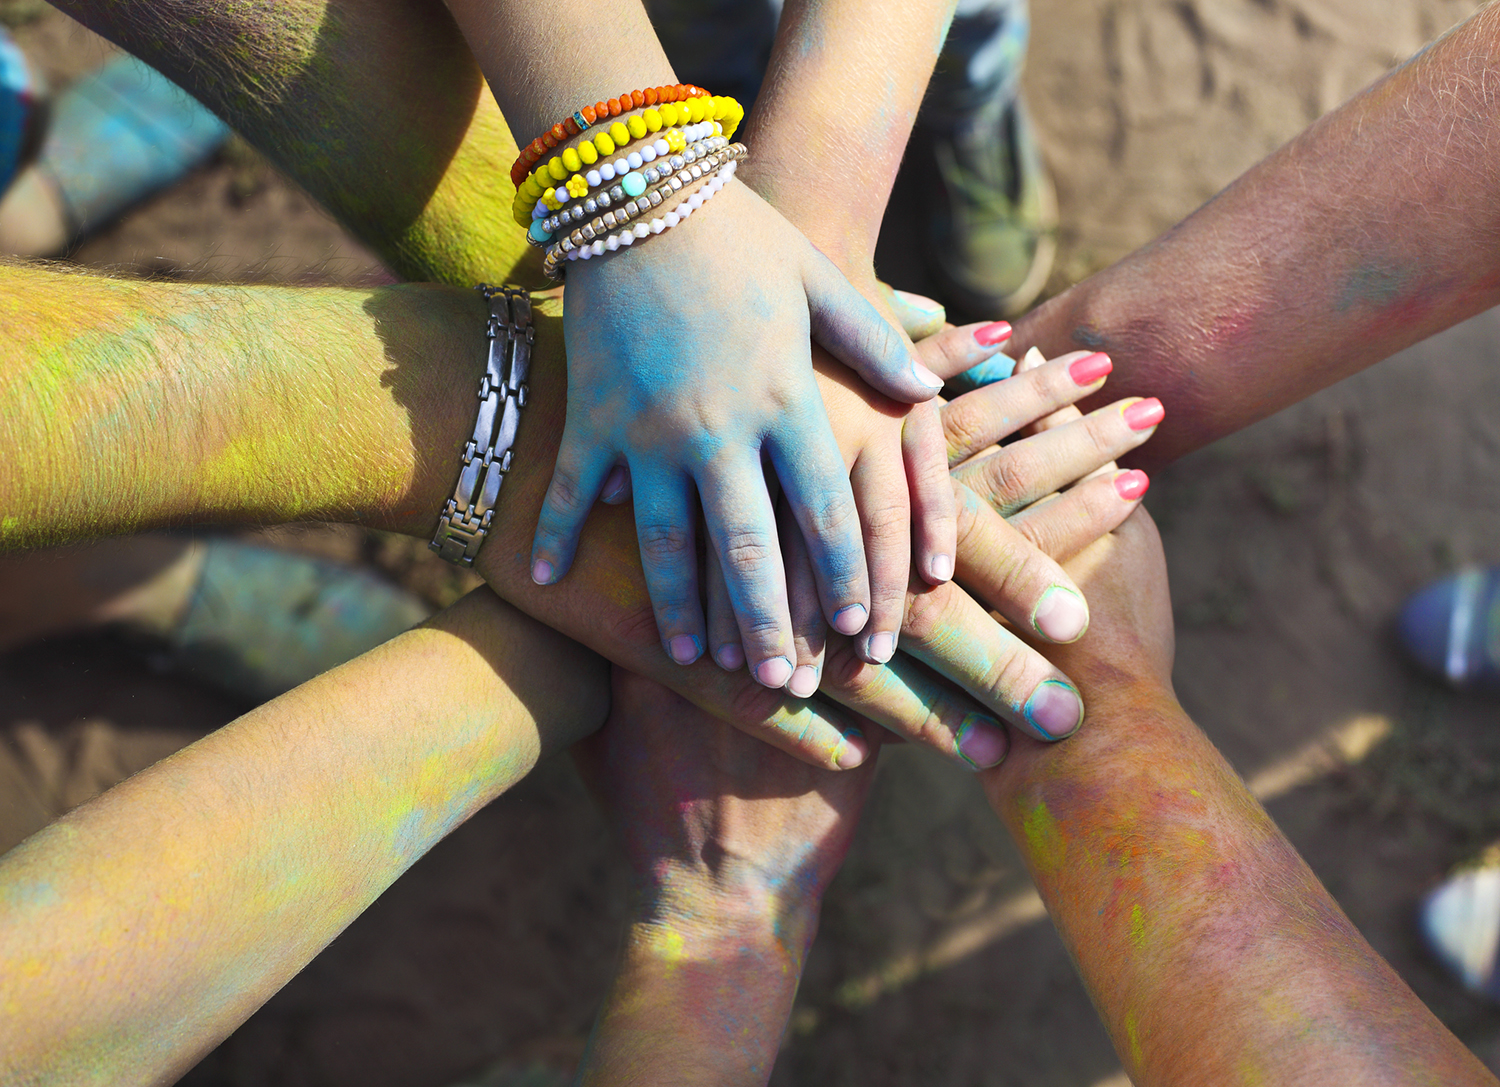 Friends at a Holi colors festival (India) join hands as a show of unity and teamwork.